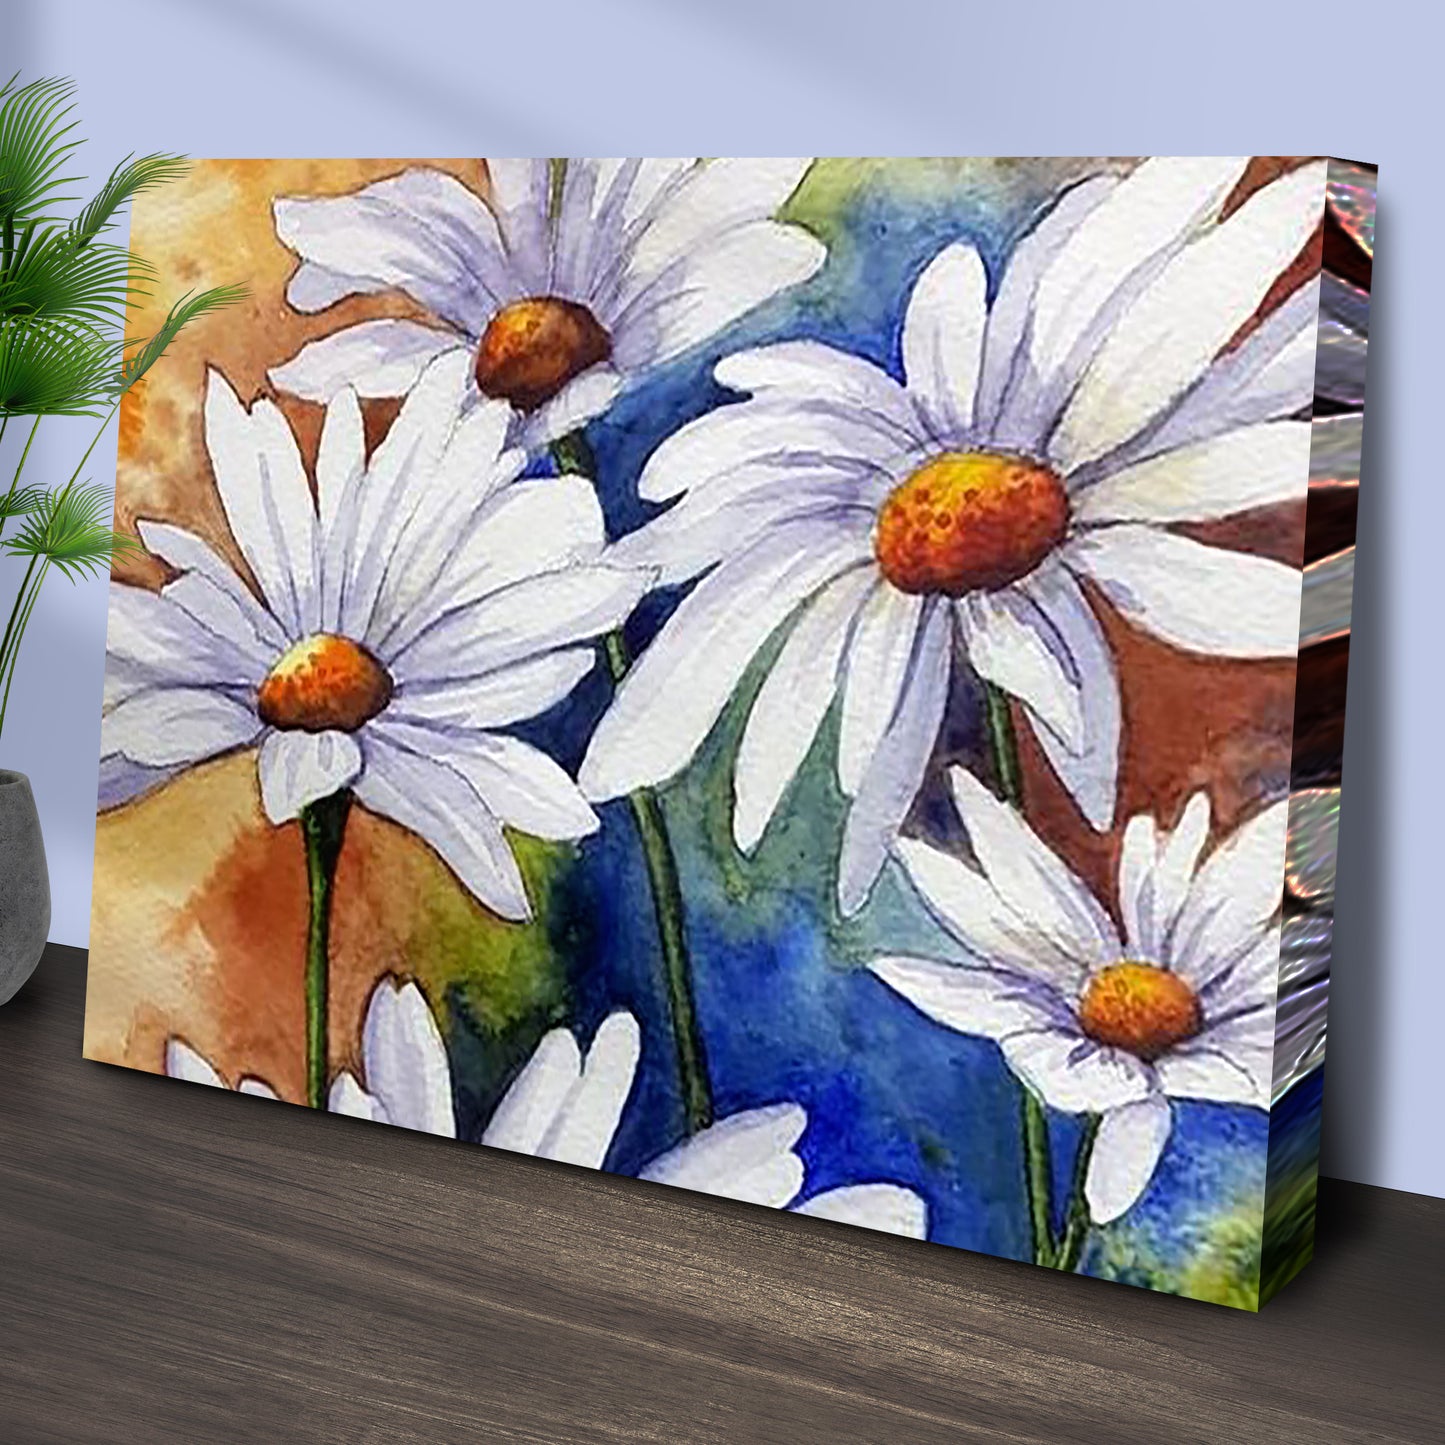 Dancing Daisies Canvas Wall Art Style 1 - Image by Tailored Canvases